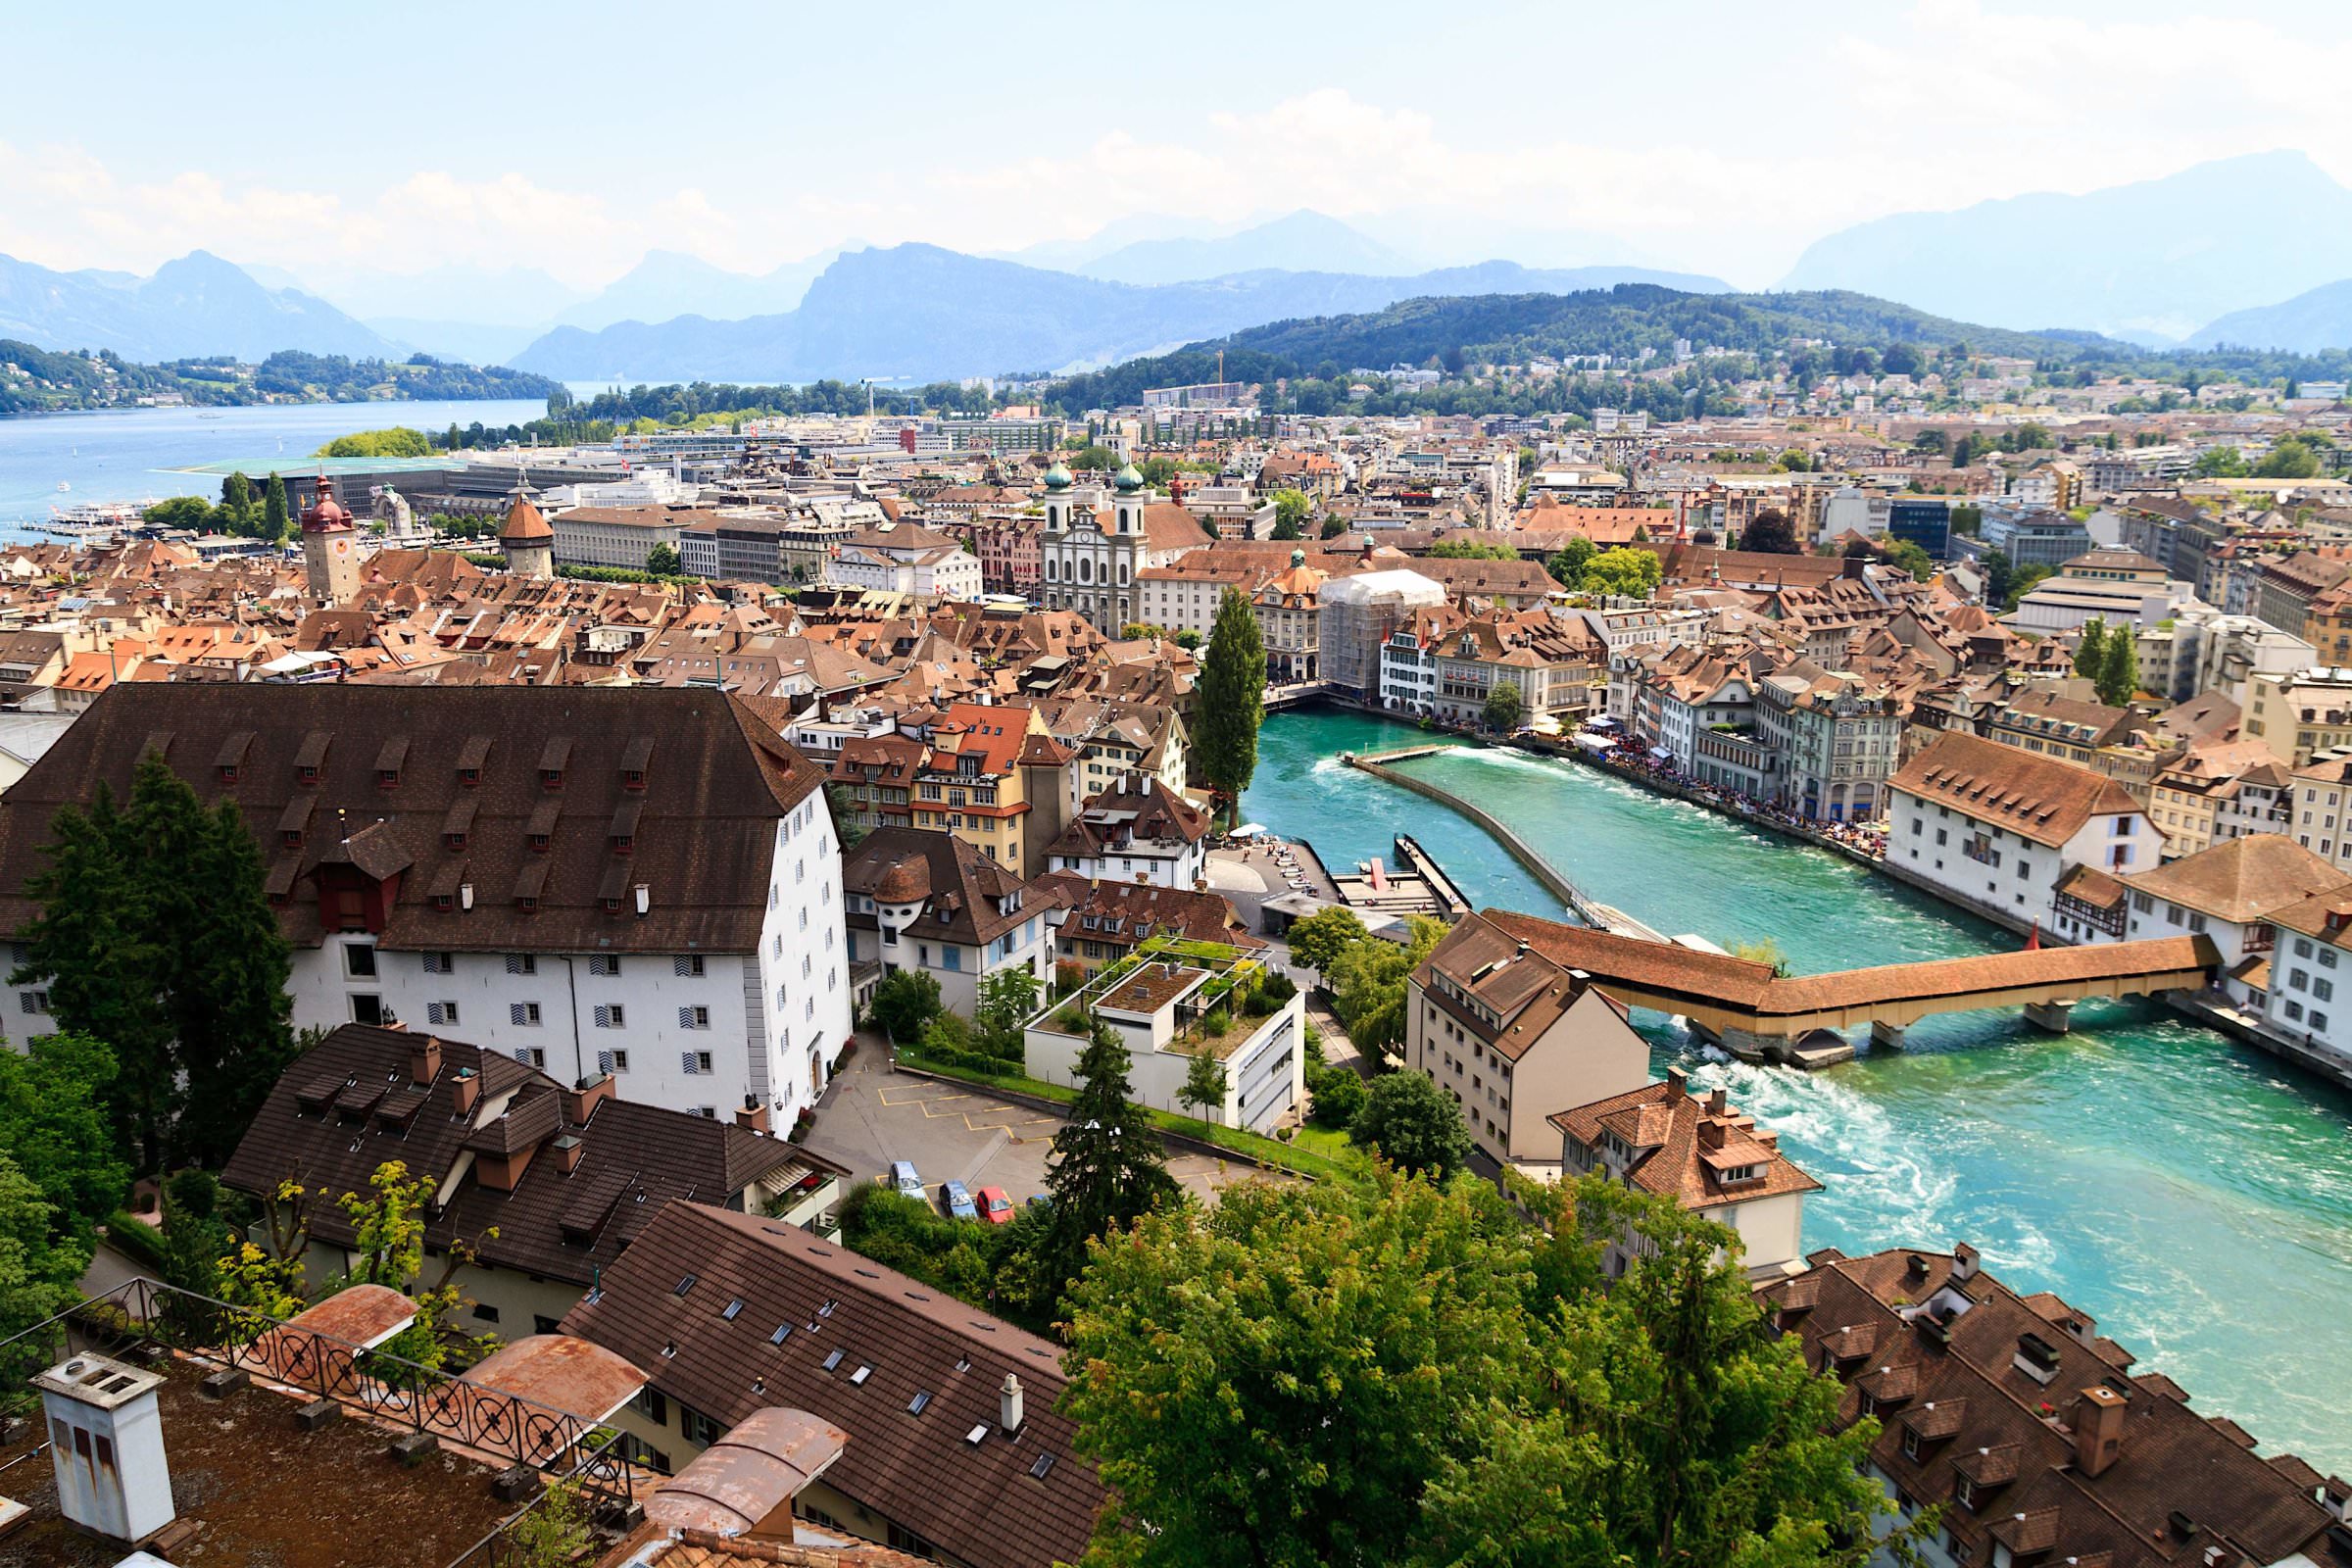 The complete France and Switzerland itinerary for an exotic honeymoon